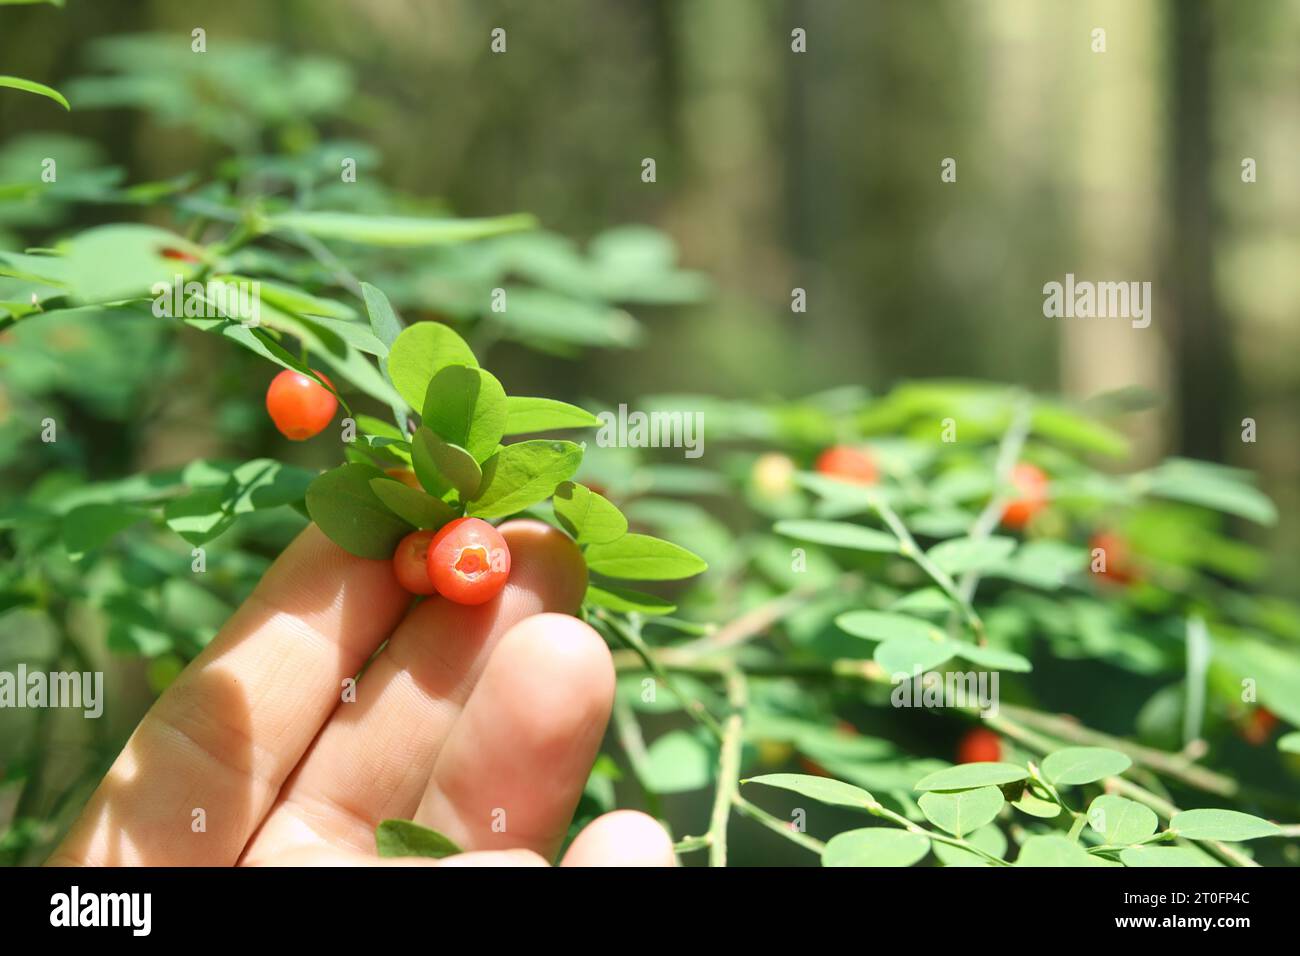 Hand showing red huckleberry on Huckleberry plant, ready to be harvested. Hand of female hiker in forest while foraging or picking forest fruit berrie Stock Photo